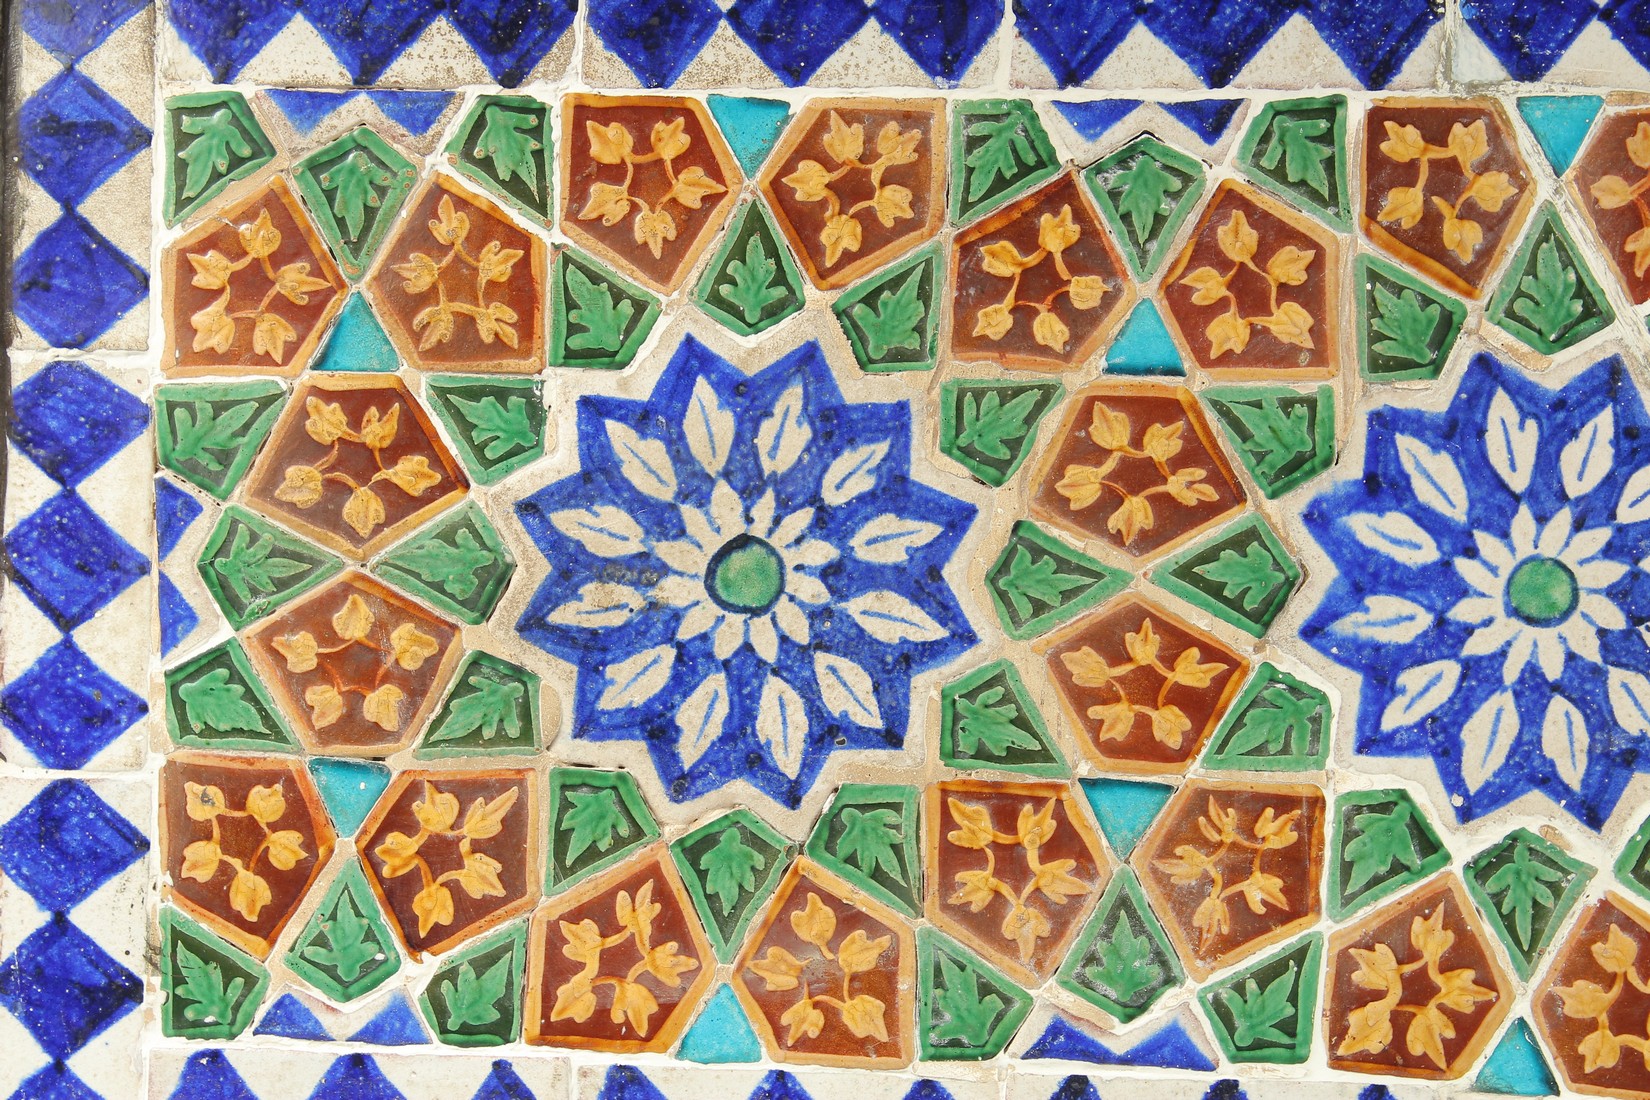 A FINE LARGE 19TH CENTURY INDIAN GLAZED POTTERY TILED PANEL, inset within a wooden frame; possibly a - Image 2 of 4